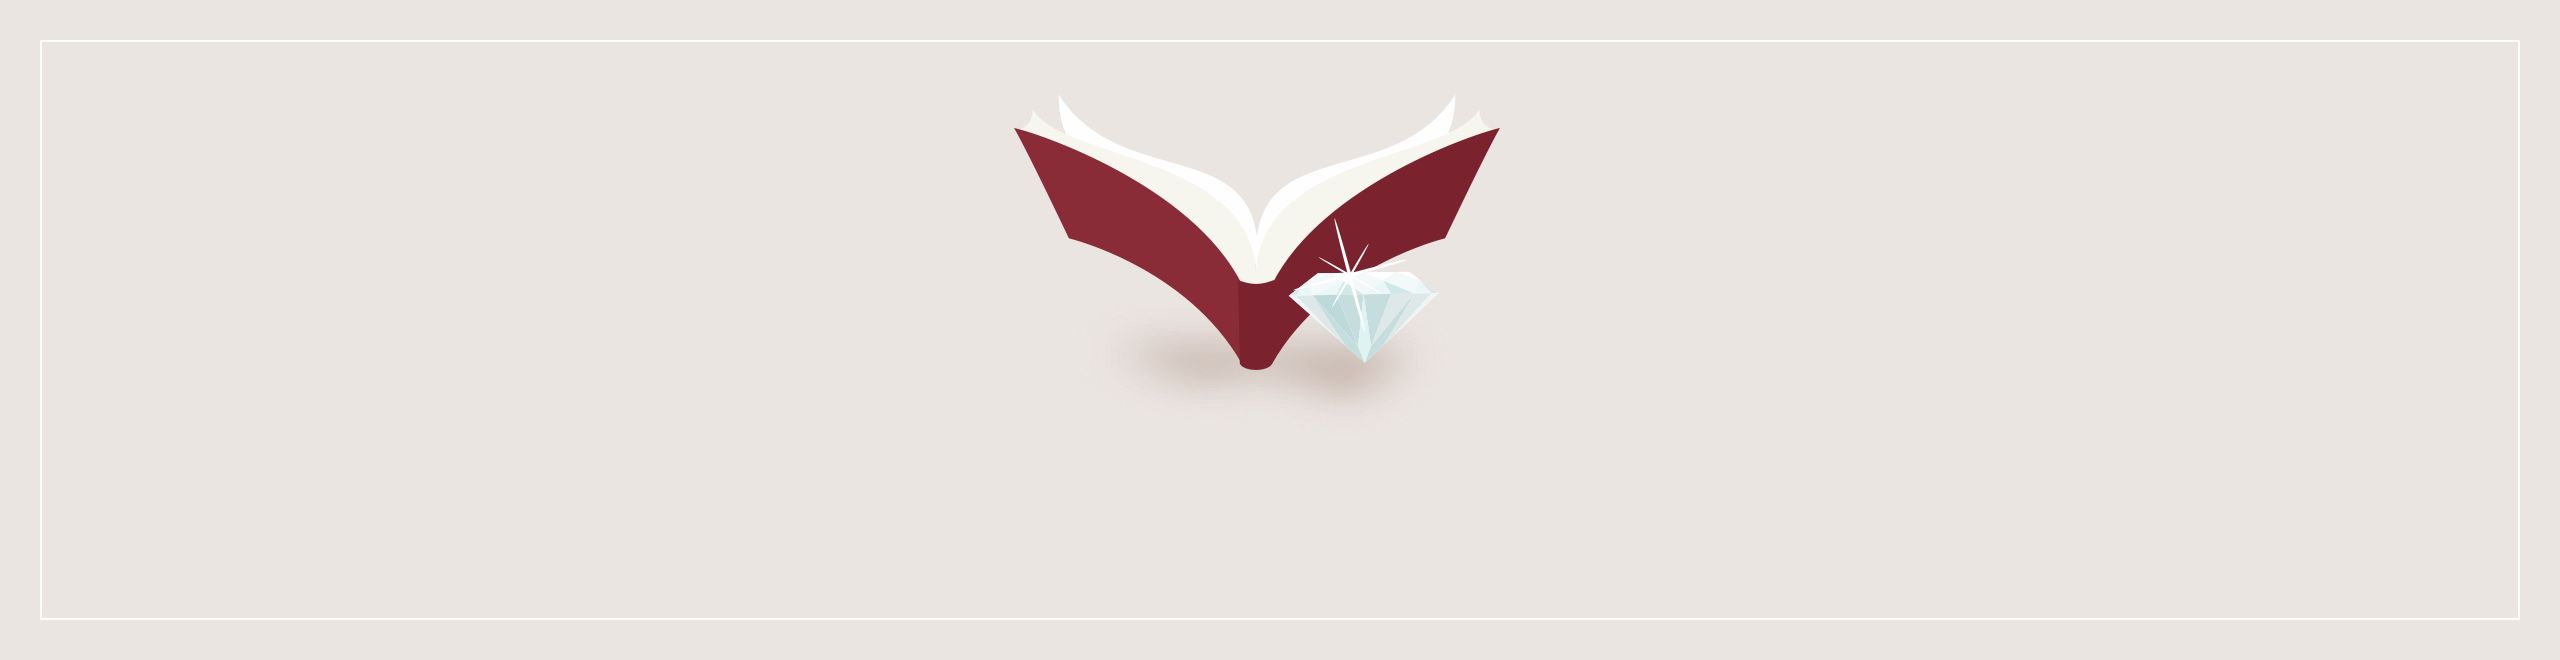 A sketch of a diamond with a dictionary behind it